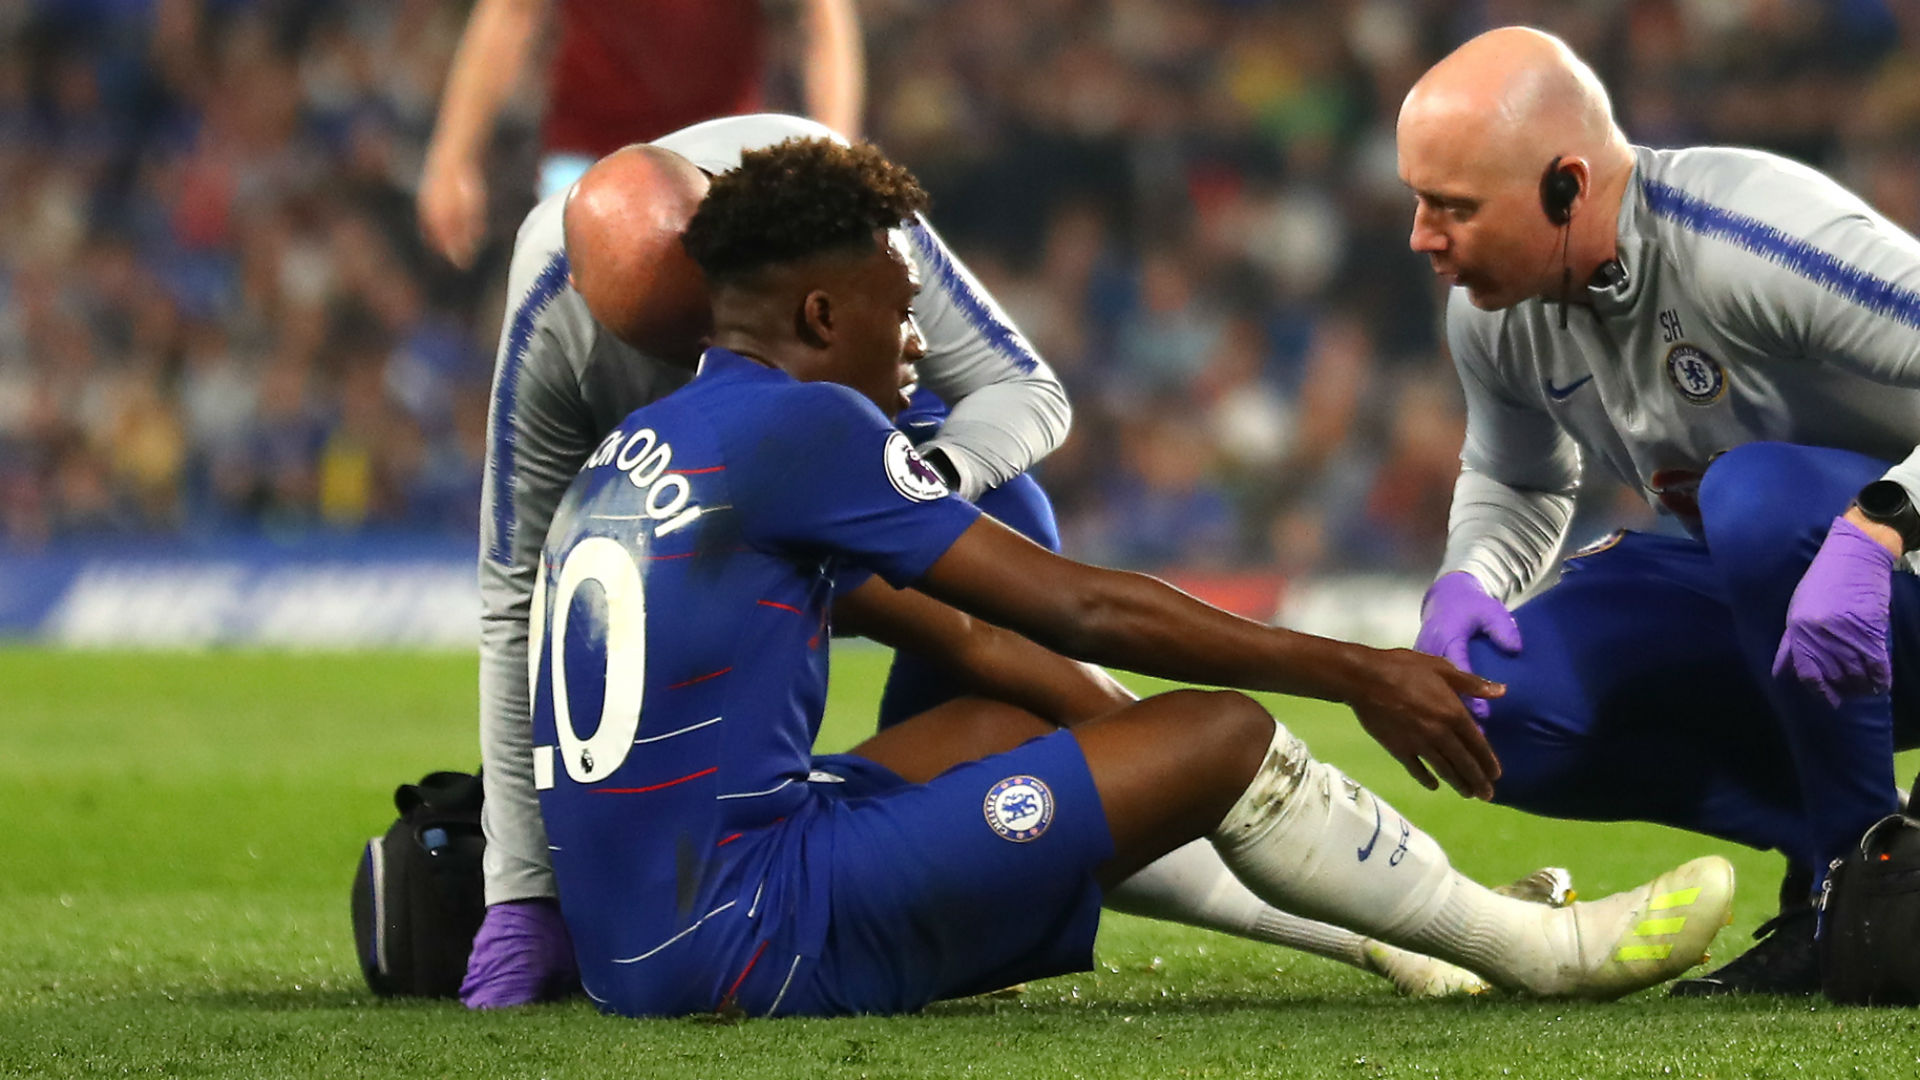 Callum Hudson-Odoi is thought to have suffered a serious Achilles tendon injury on Monday and he believes his season is over.